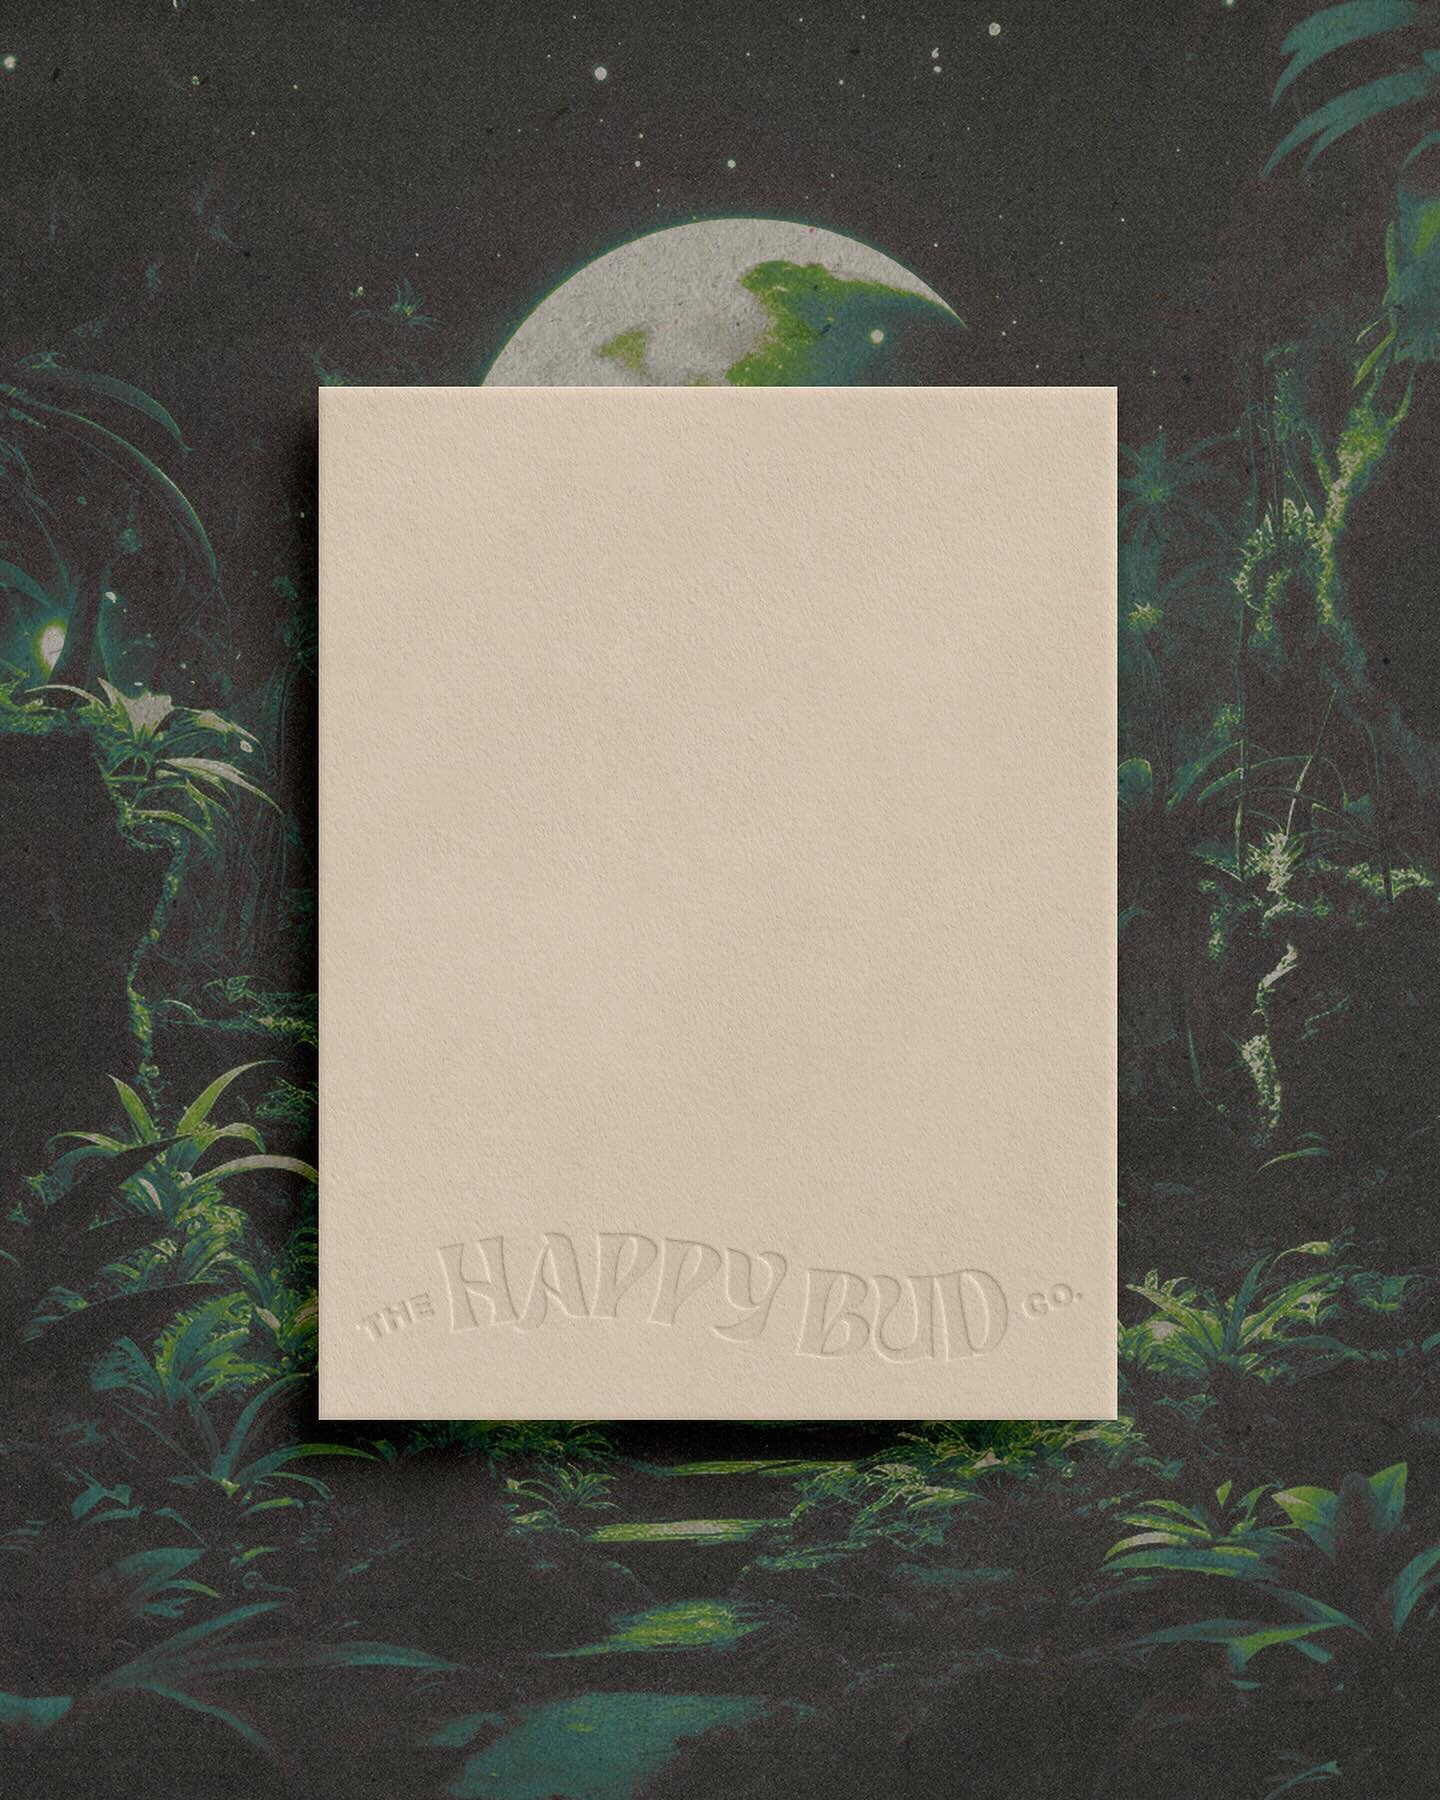 SWIPE FOR COLOUR &gt;&gt;&gt;

It was an absolute joy to create this brand, The Happy Bud Company. A brand that is pioneering a plant-based paradigm and disrupting the pharmaceutical industry by trailblazing a path in the plant-based medicine industr